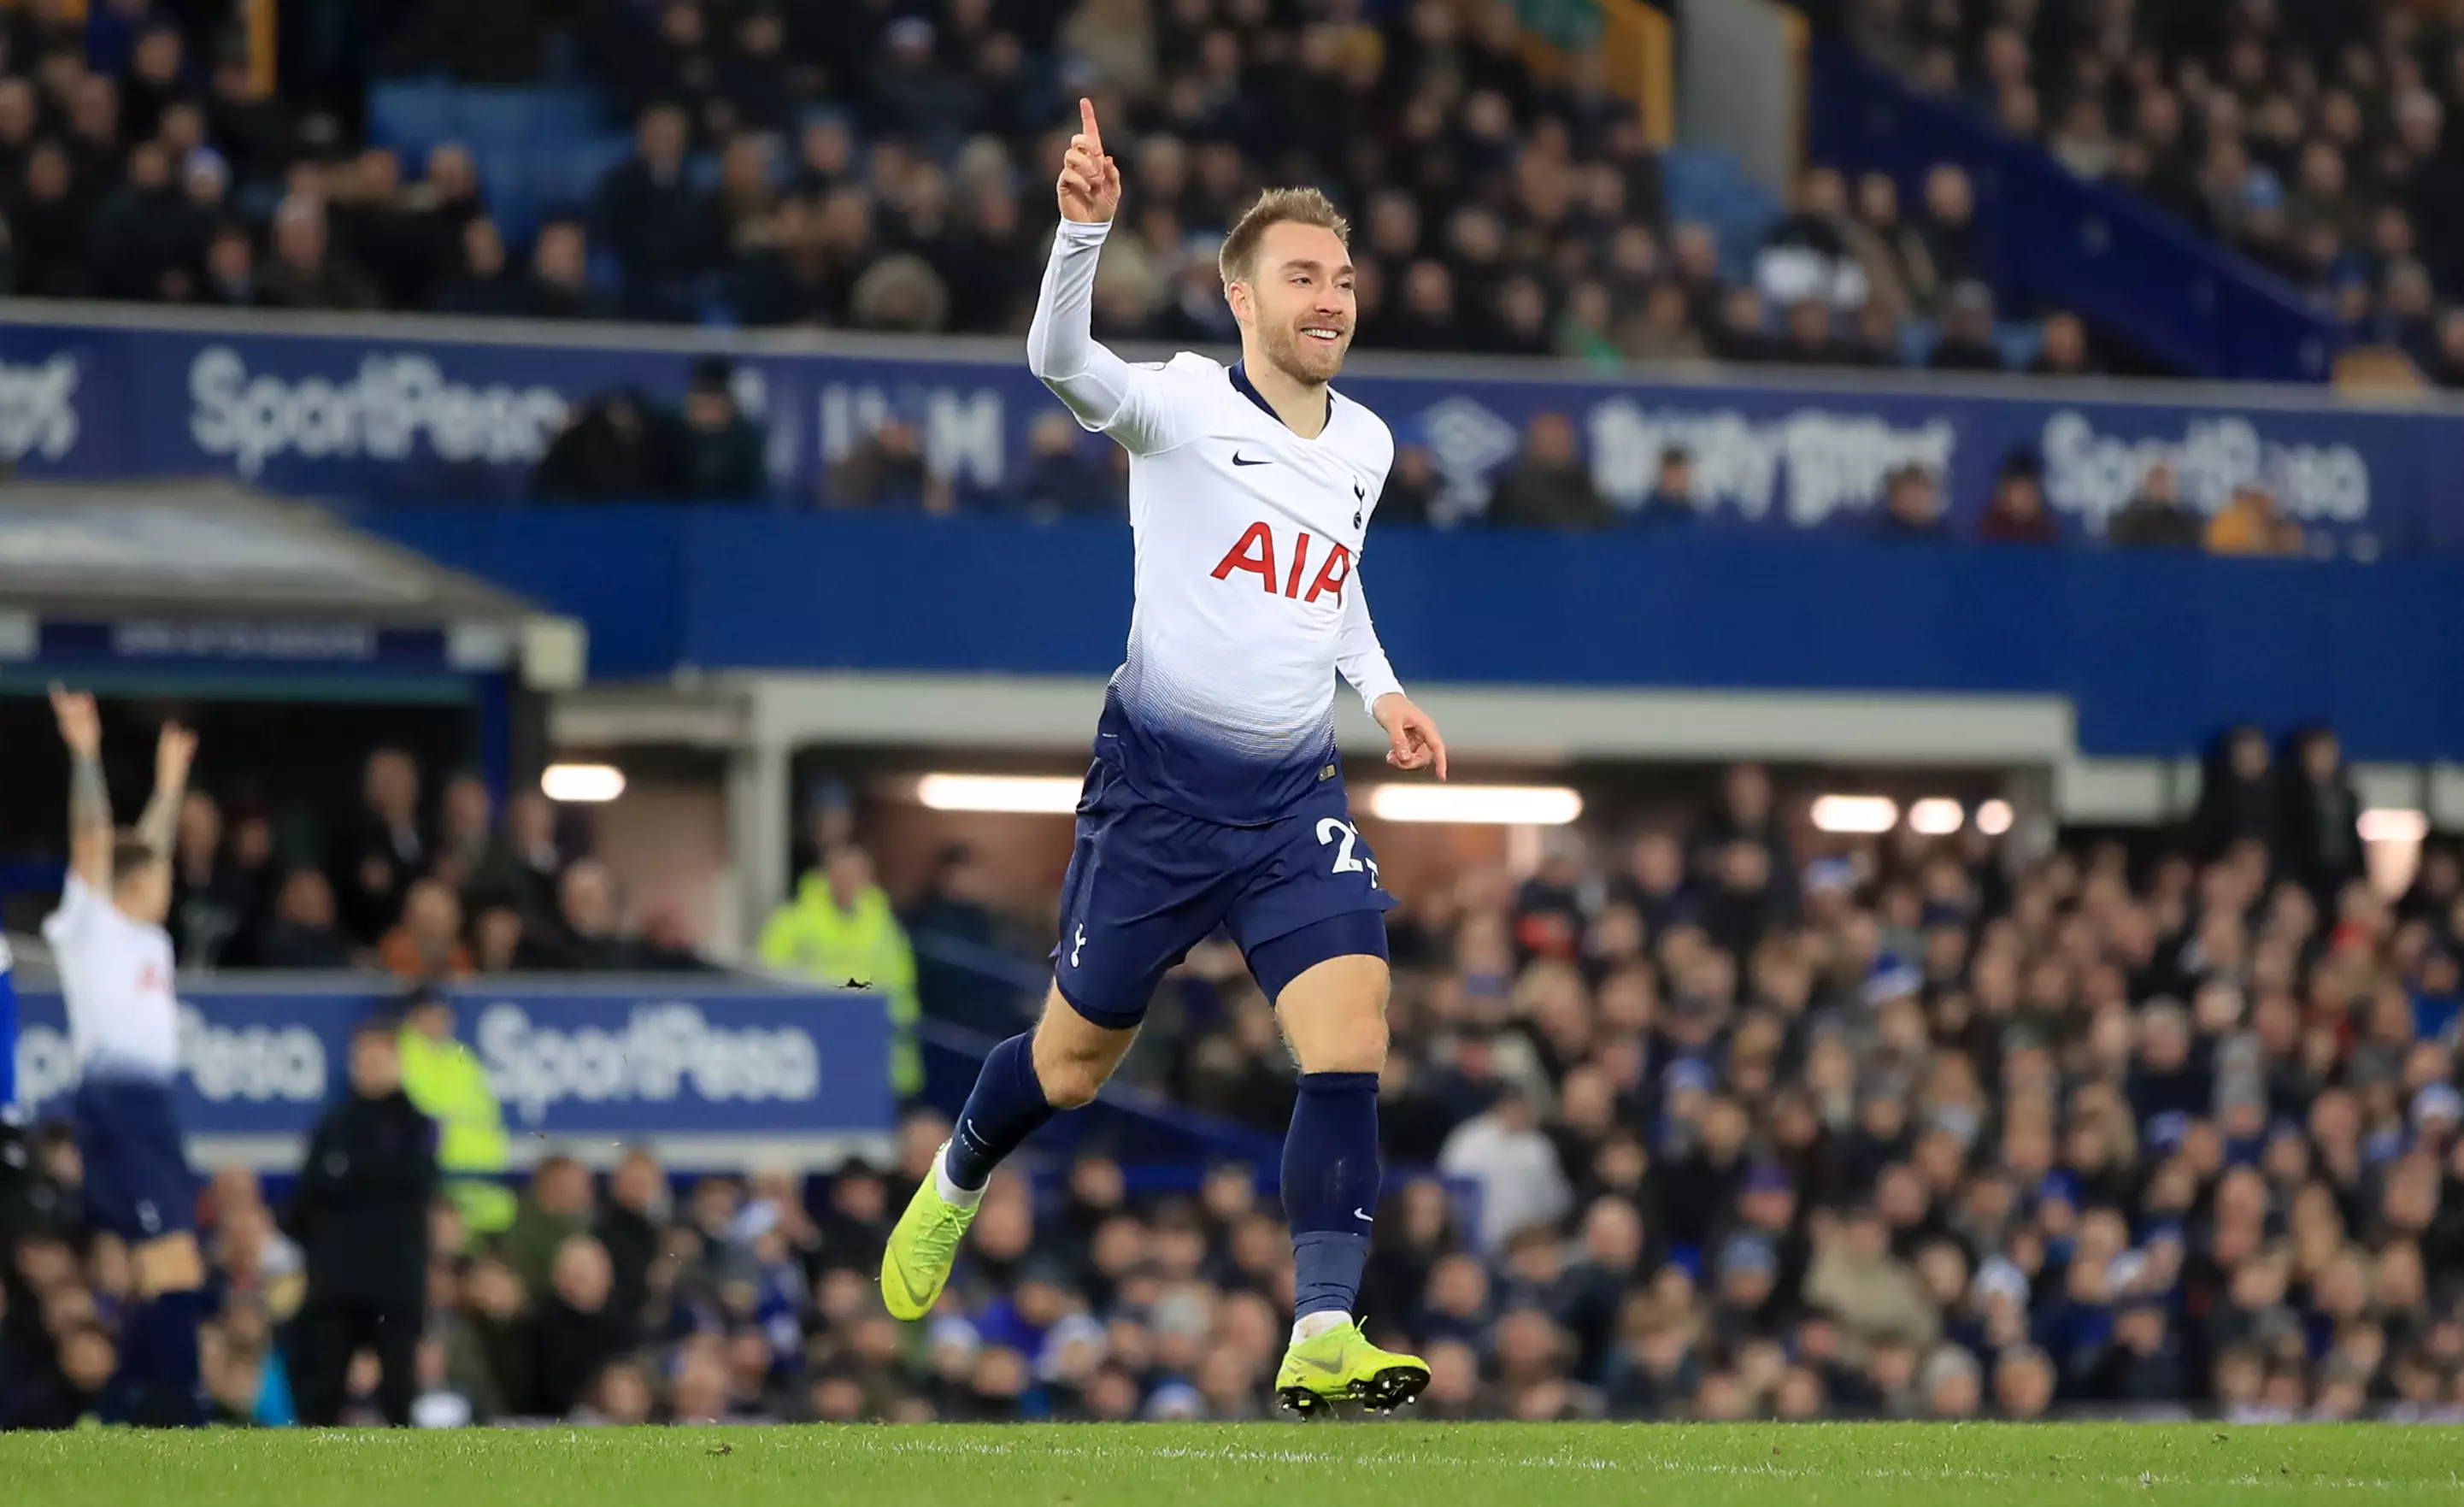 Eriksen has been brilliant for Spurs in the last few years. Image: PA Images